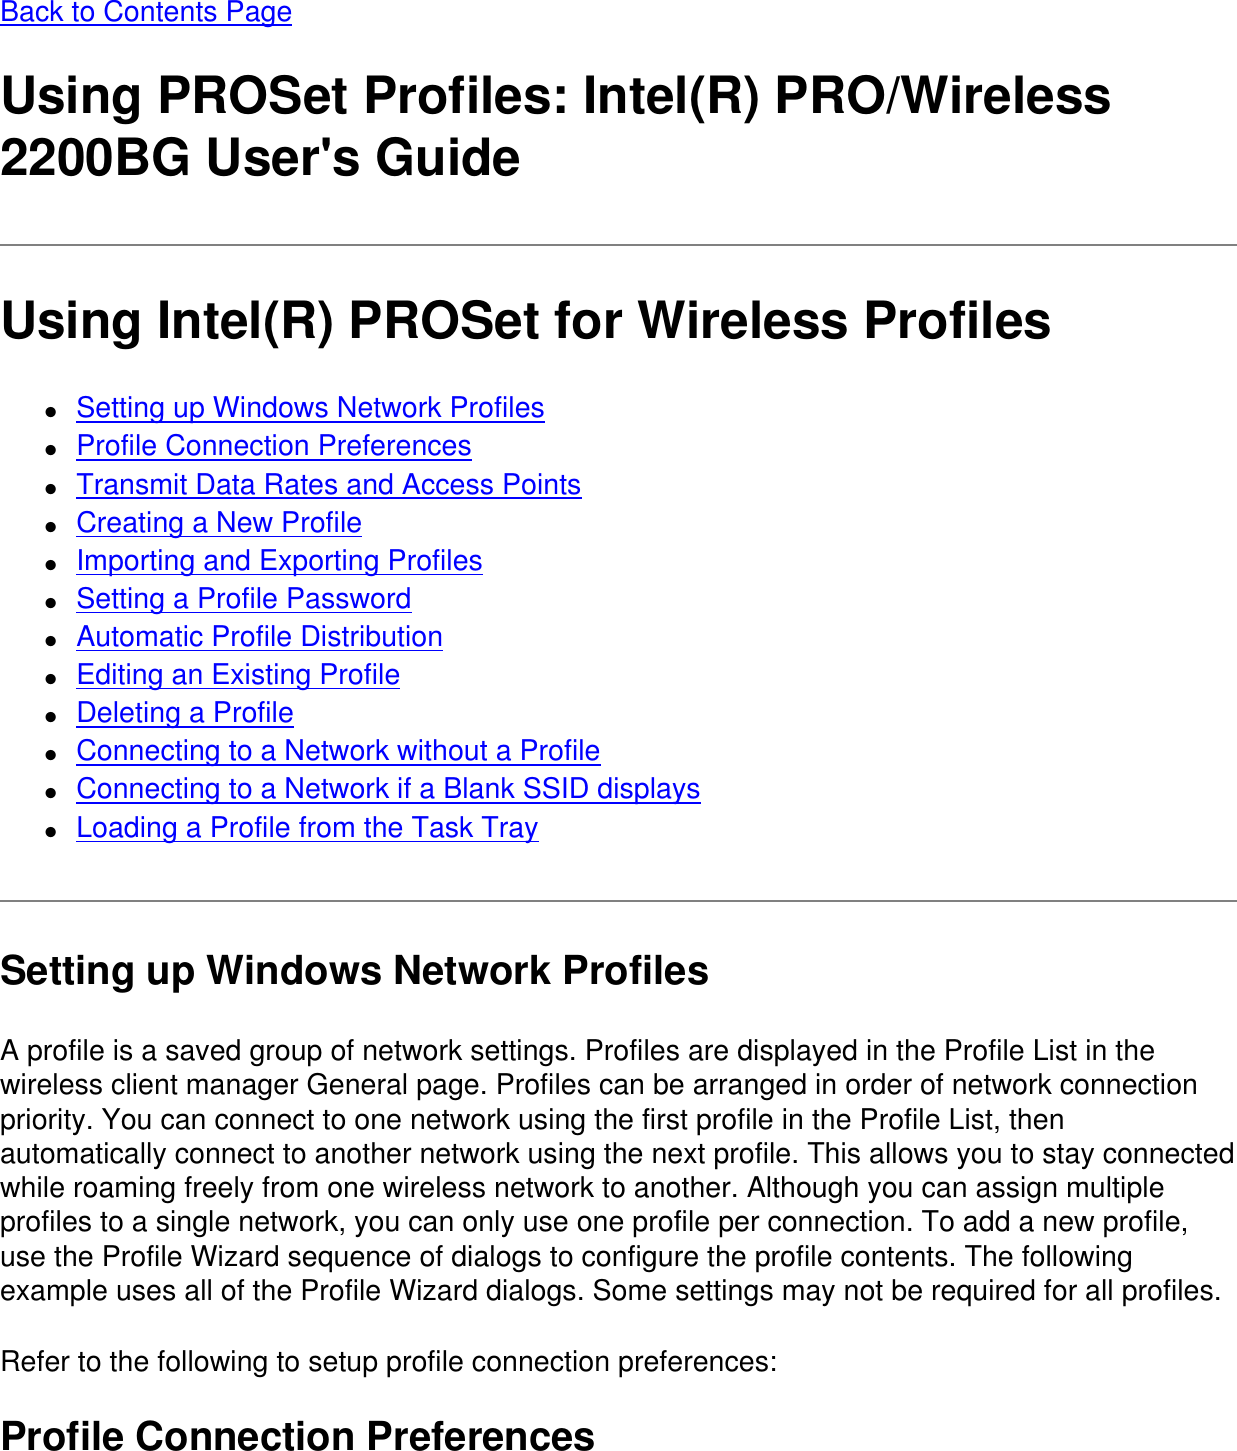 Back to Contents PageUsing PROSet Profiles: Intel(R) PRO/Wireless 2200BG User&apos;s GuideUsing Intel(R) PROSet for Wireless Profiles●     Setting up Windows Network Profiles●     Profile Connection Preferences●     Transmit Data Rates and Access Points●     Creating a New Profile●     Importing and Exporting Profiles●     Setting a Profile Password●     Automatic Profile Distribution●     Editing an Existing Profile●     Deleting a Profile●     Connecting to a Network without a Profile●     Connecting to a Network if a Blank SSID displays●     Loading a Profile from the Task TraySetting up Windows Network ProfilesA profile is a saved group of network settings. Profiles are displayed in the Profile List in the wireless client manager General page. Profiles can be arranged in order of network connection priority. You can connect to one network using the first profile in the Profile List, then automatically connect to another network using the next profile. This allows you to stay connected while roaming freely from one wireless network to another. Although you can assign multiple profiles to a single network, you can only use one profile per connection. To add a new profile, use the Profile Wizard sequence of dialogs to configure the profile contents. The following example uses all of the Profile Wizard dialogs. Some settings may not be required for all profiles.Refer to the following to setup profile connection preferences:Profile Connection Preferences